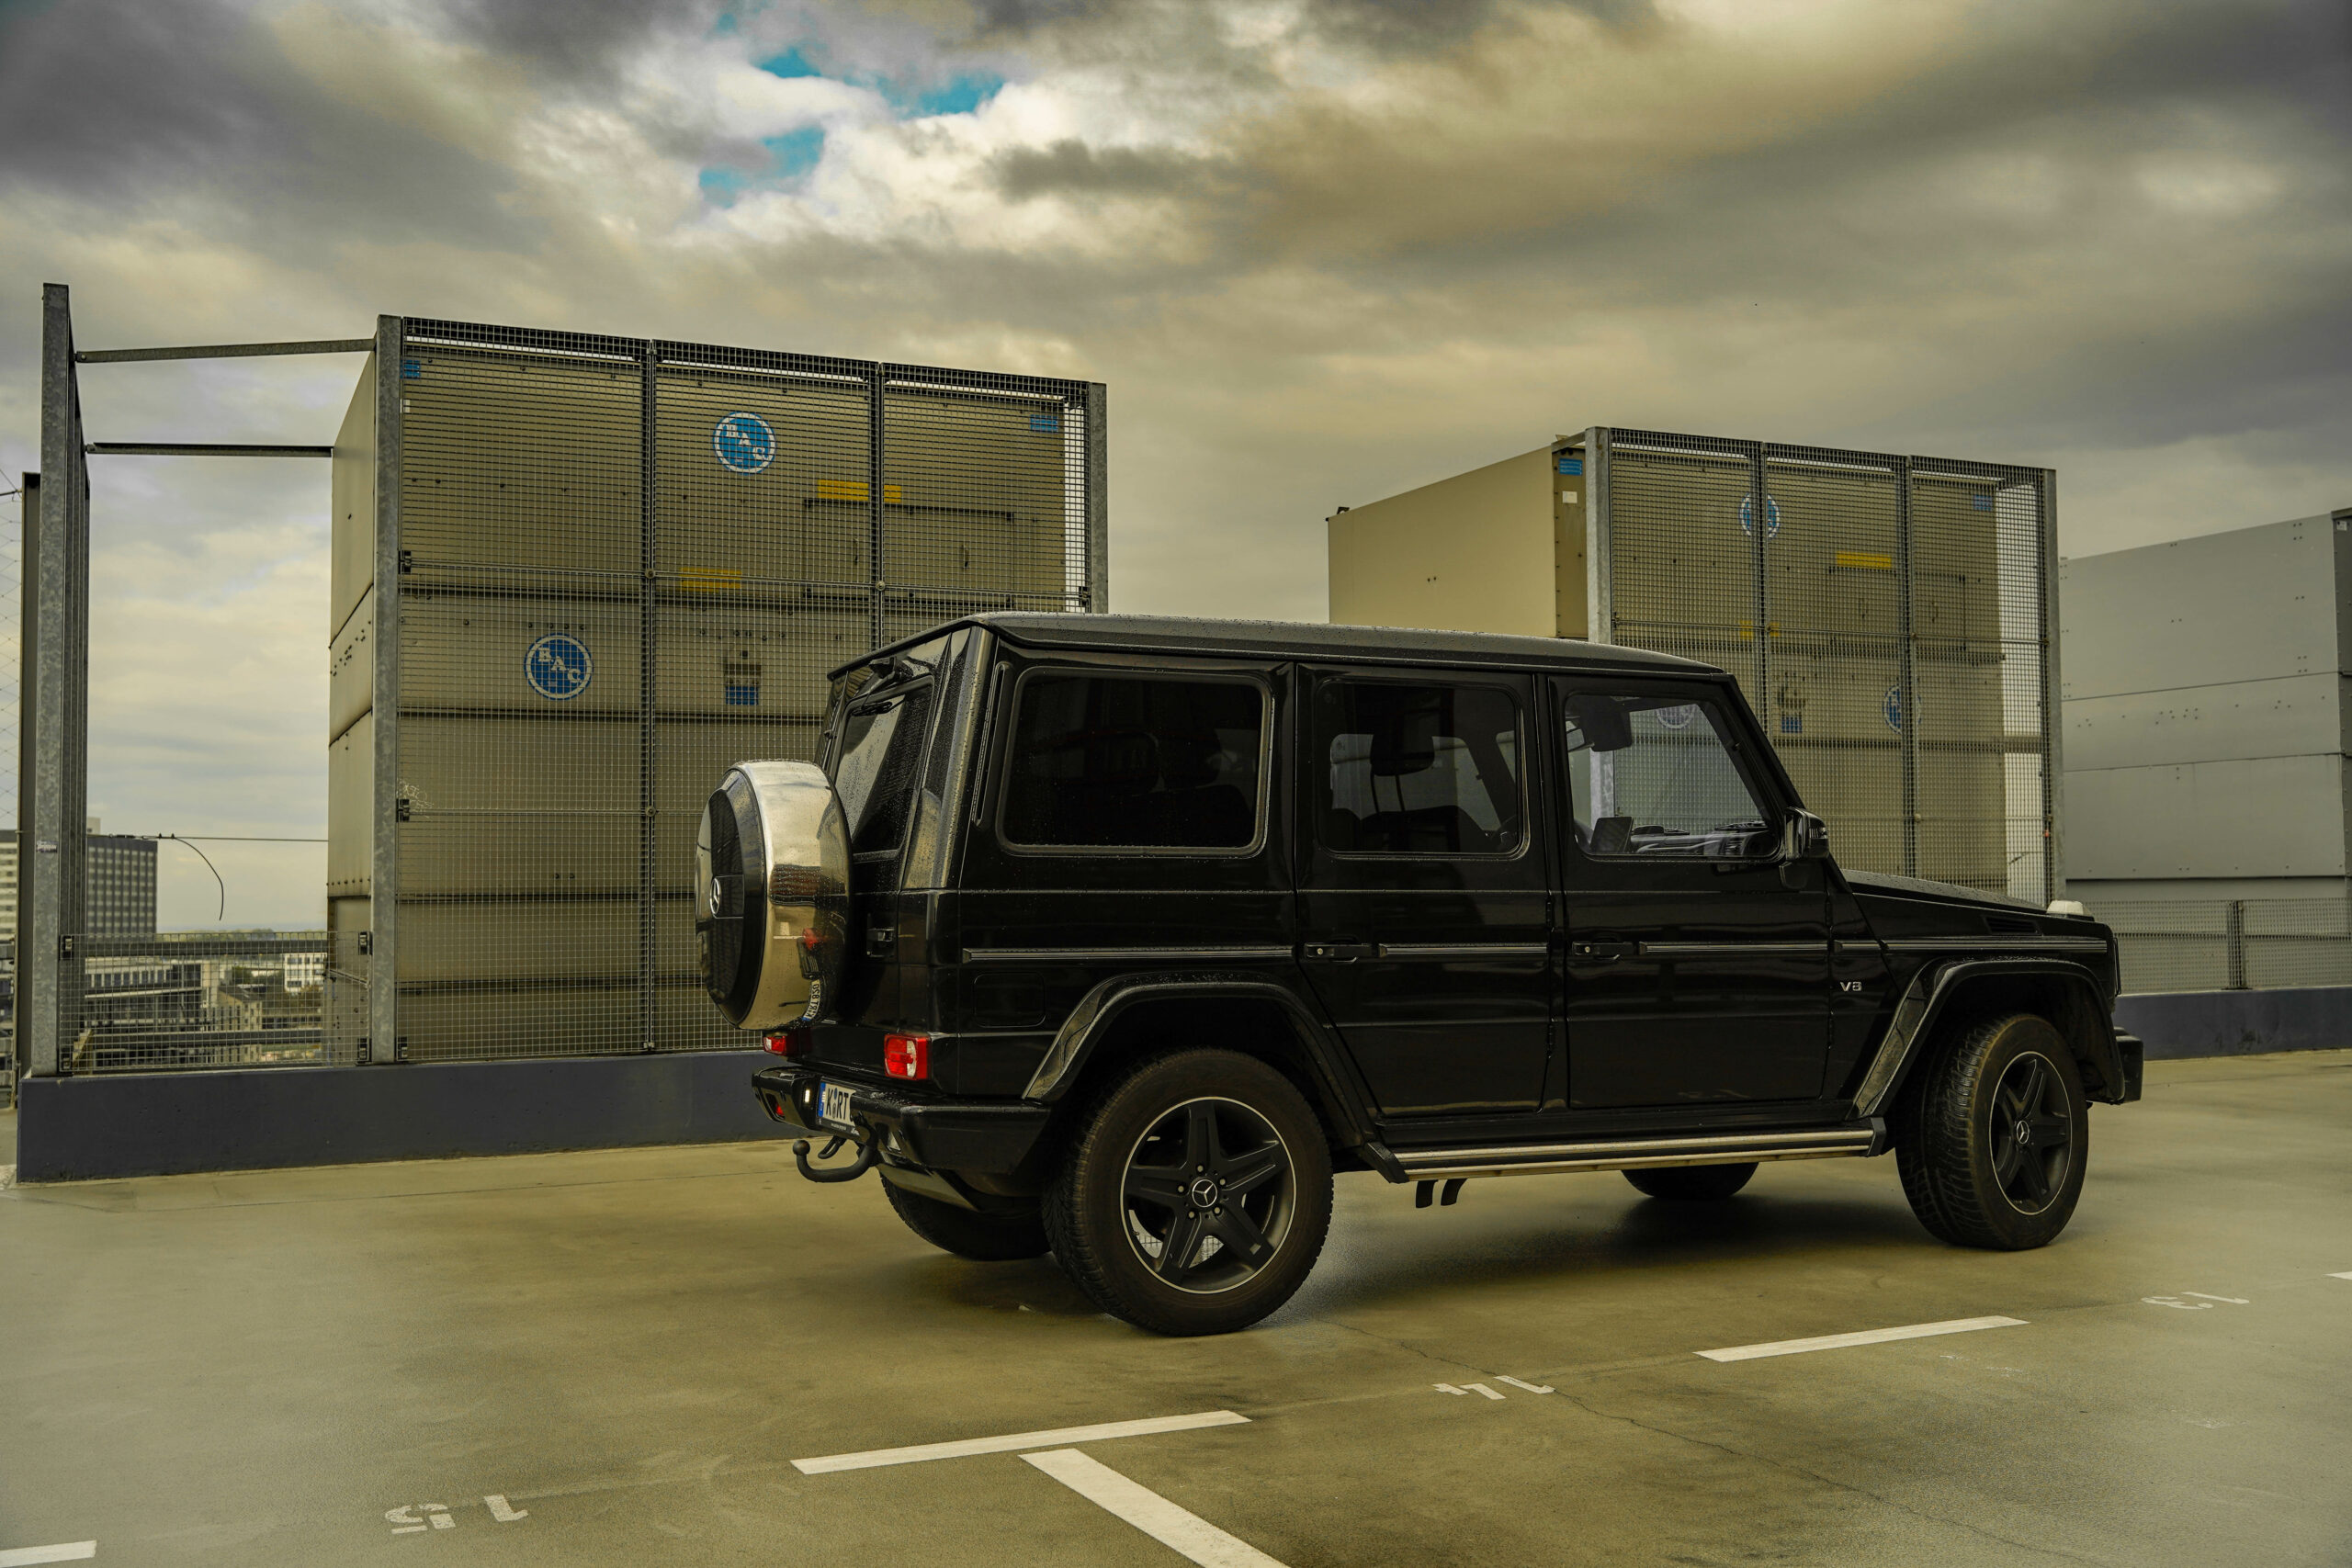 Mercedes G500 side view rent time side view parking slot